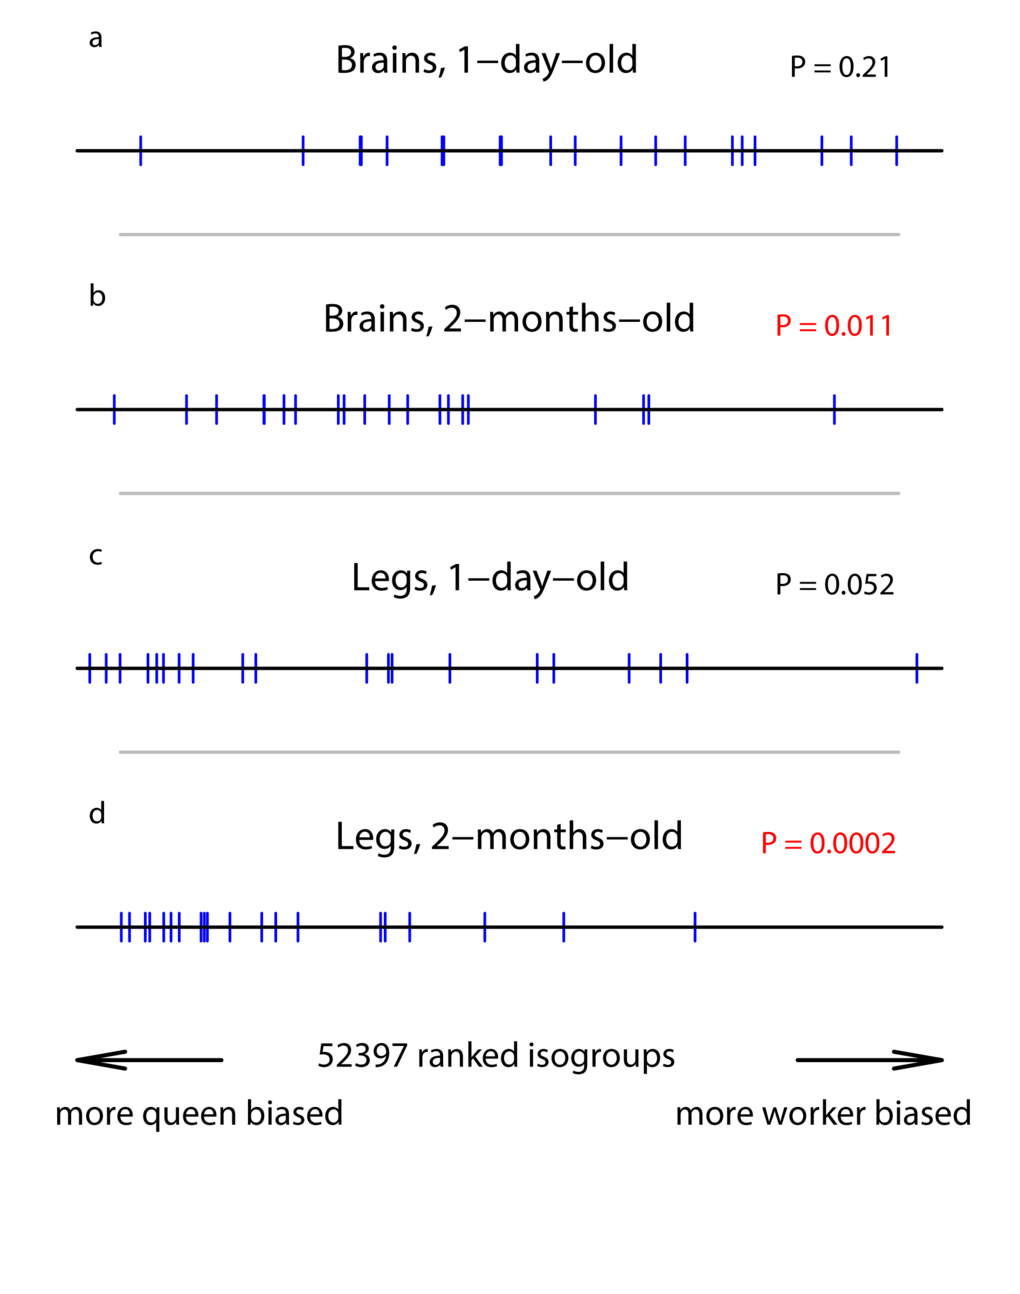 Position of our set of somatic repair genes in a ranked list of all isogroups. The horizontal line represents the list of isogroups, ranked according the their significance in bias towards queens or workers, with isogroups in the middle showing relatively unbiased expression. Each vertical bar represents the position of one of our candidate genes. The P-values were generated by the GSEA analysis and represent a test of the null hypothesis that the blue bars are randomly distributes along the black line. (a) RNA extracted from brains of 1-day-old individuals. (b) RNA extracted from the brains of 2-month-old individuals. (c) RNA extracted from legs of 1-day-old individuals. (d) RNA extracted from legs of 2-month-old individuals.